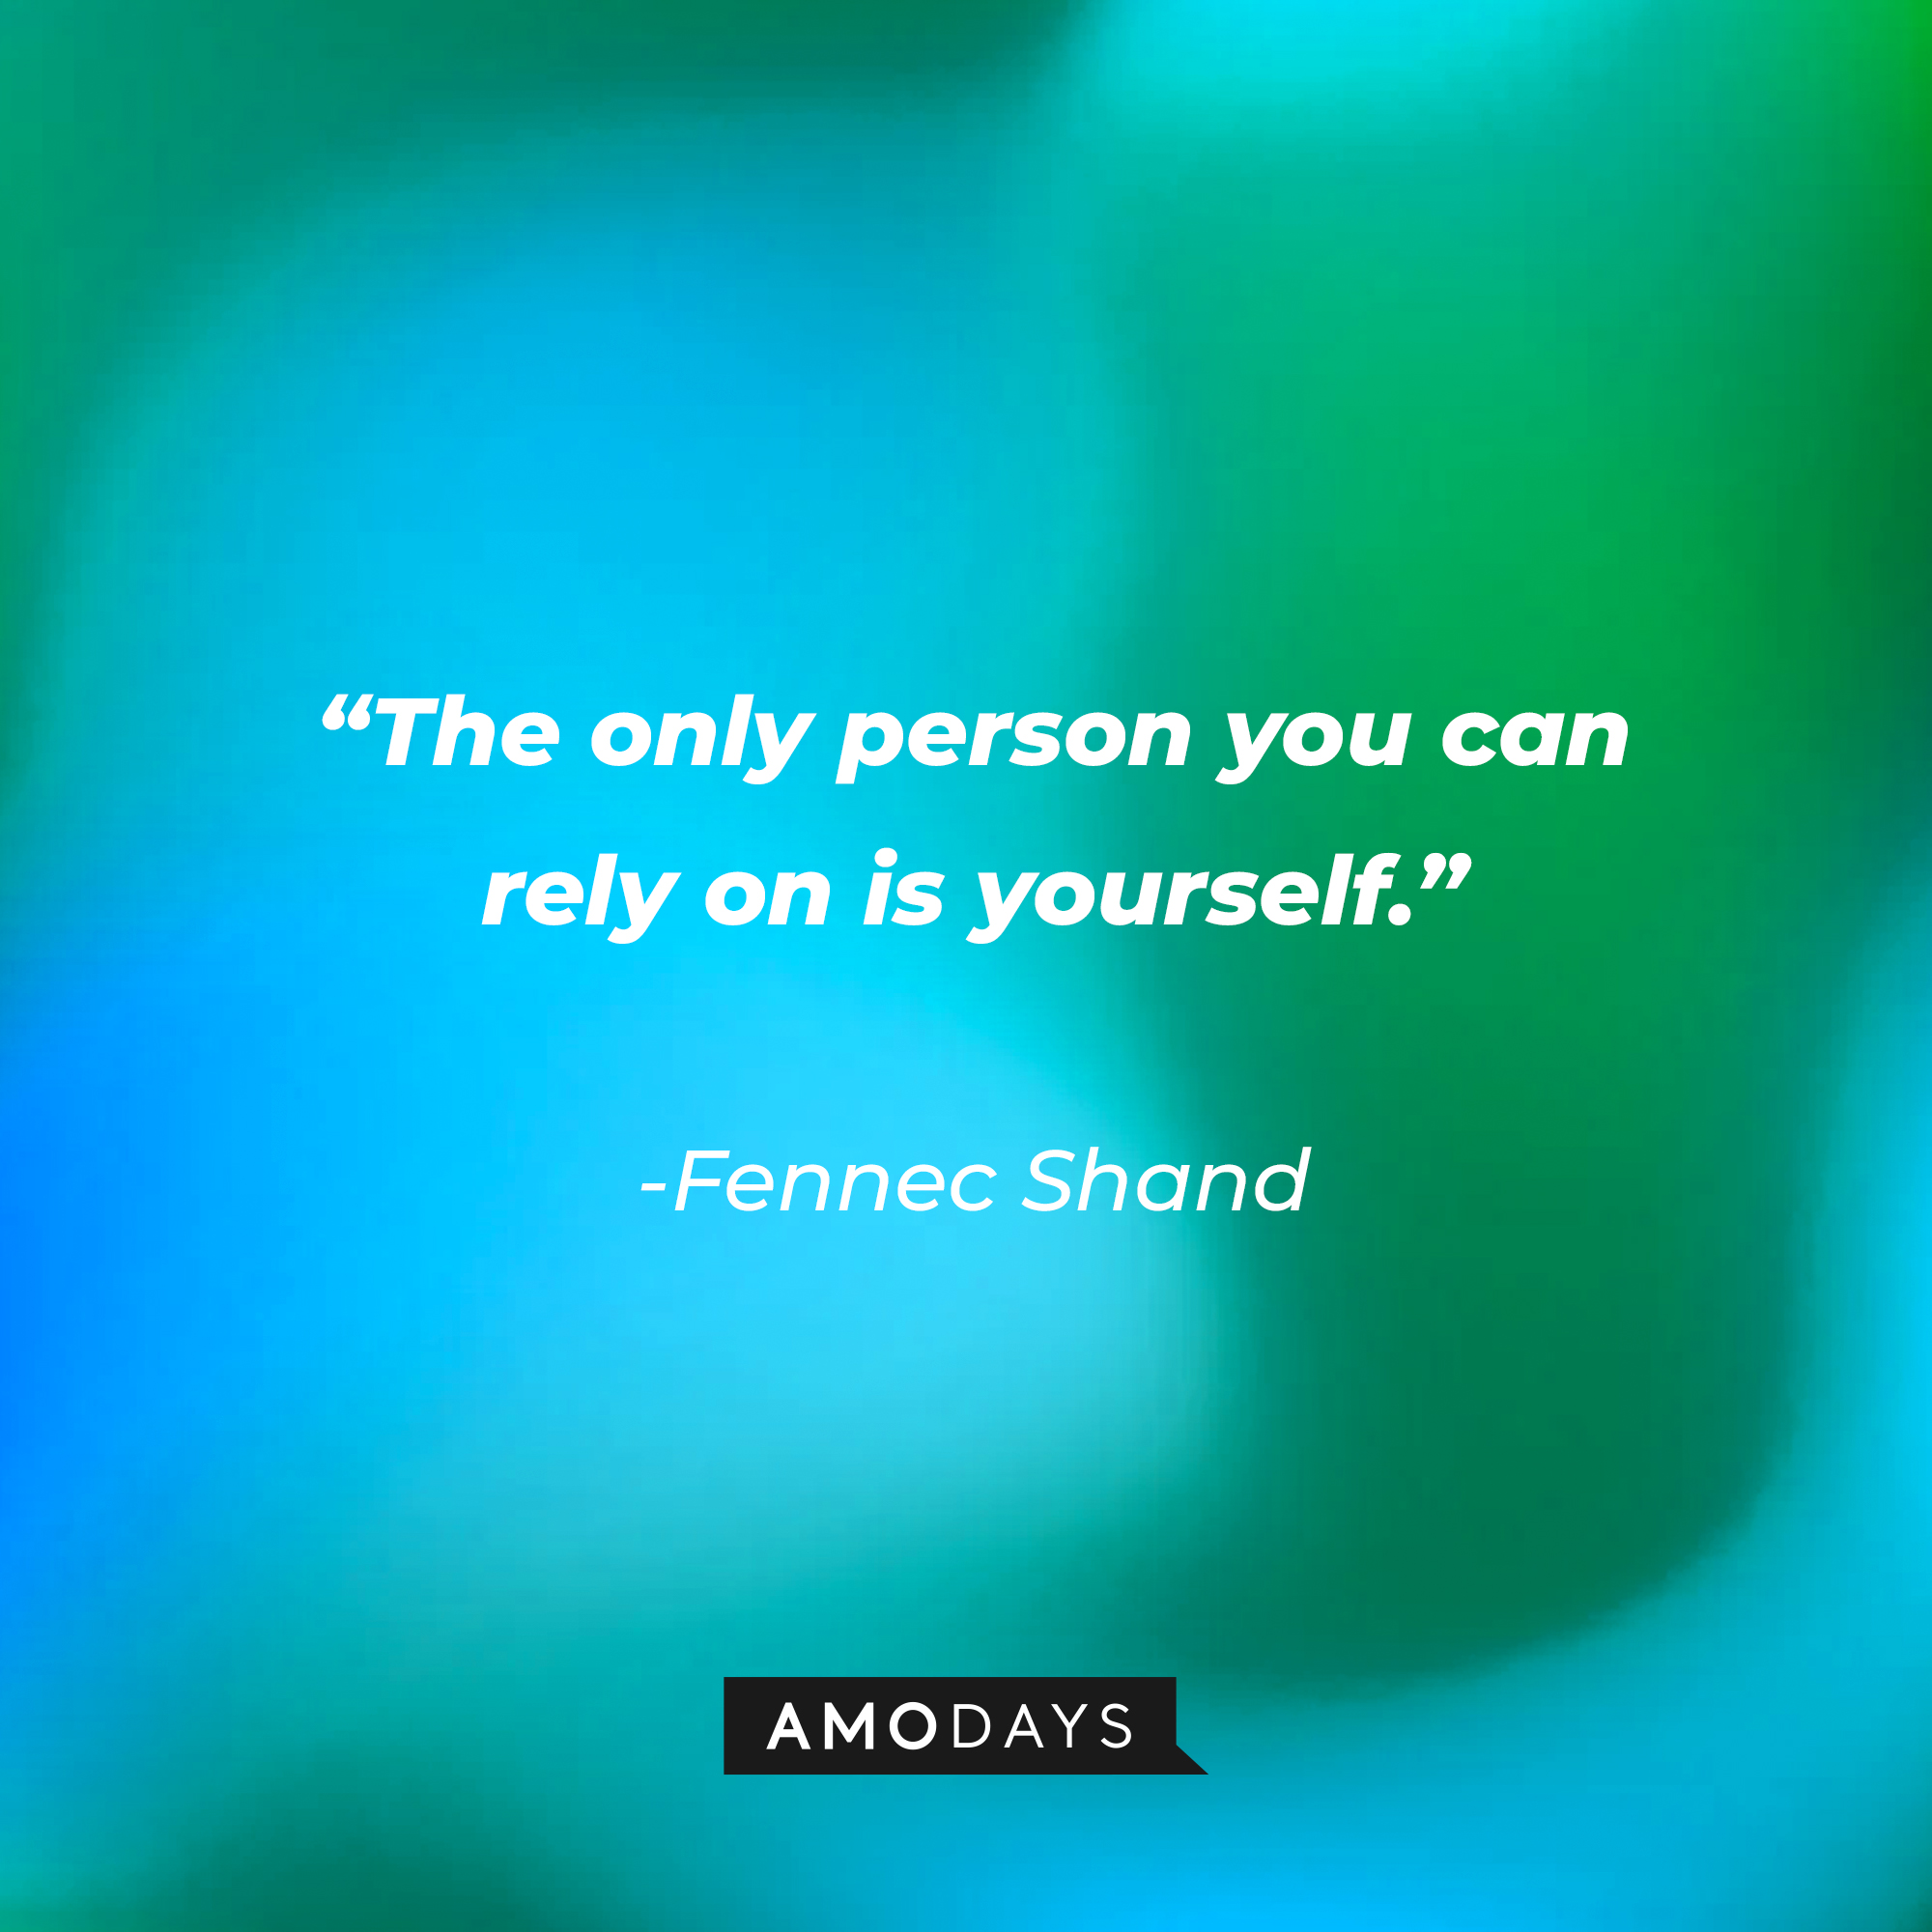 Fennec Shand’s quote: “The only person you can rely on is yourself.”  | Source: AmoDays